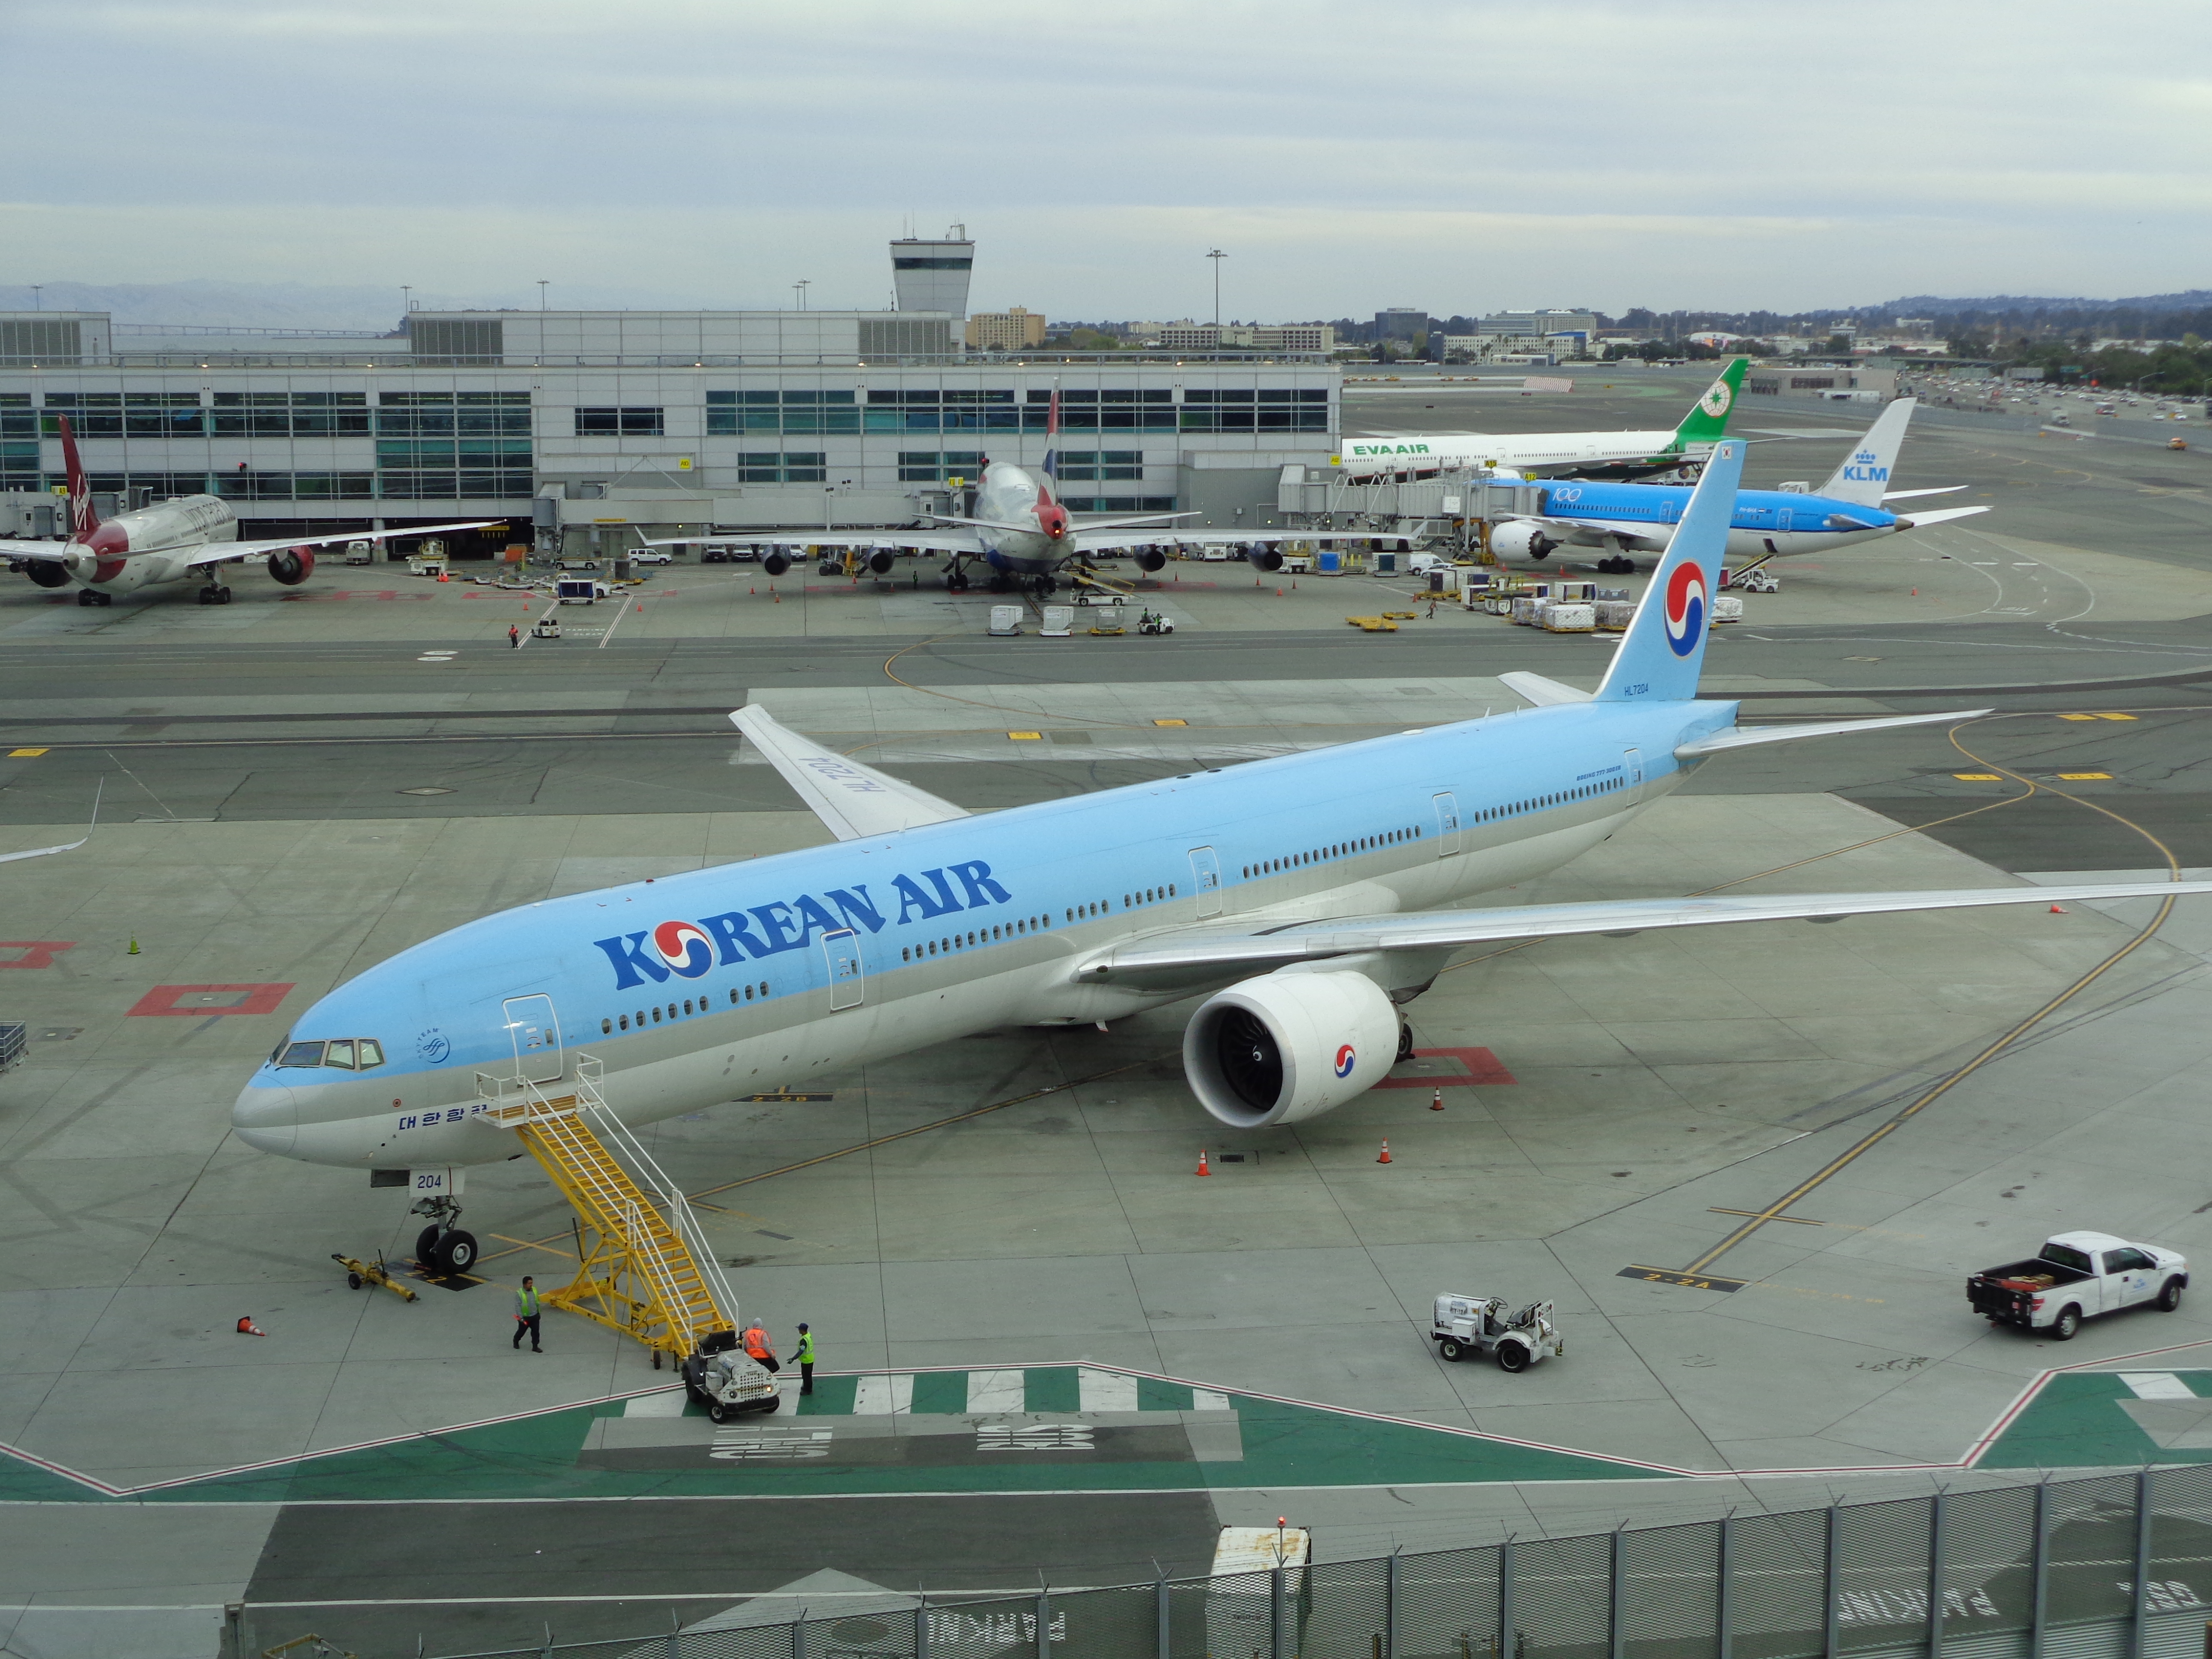 Korean Air charges standard rates for adding a baby to your ticket